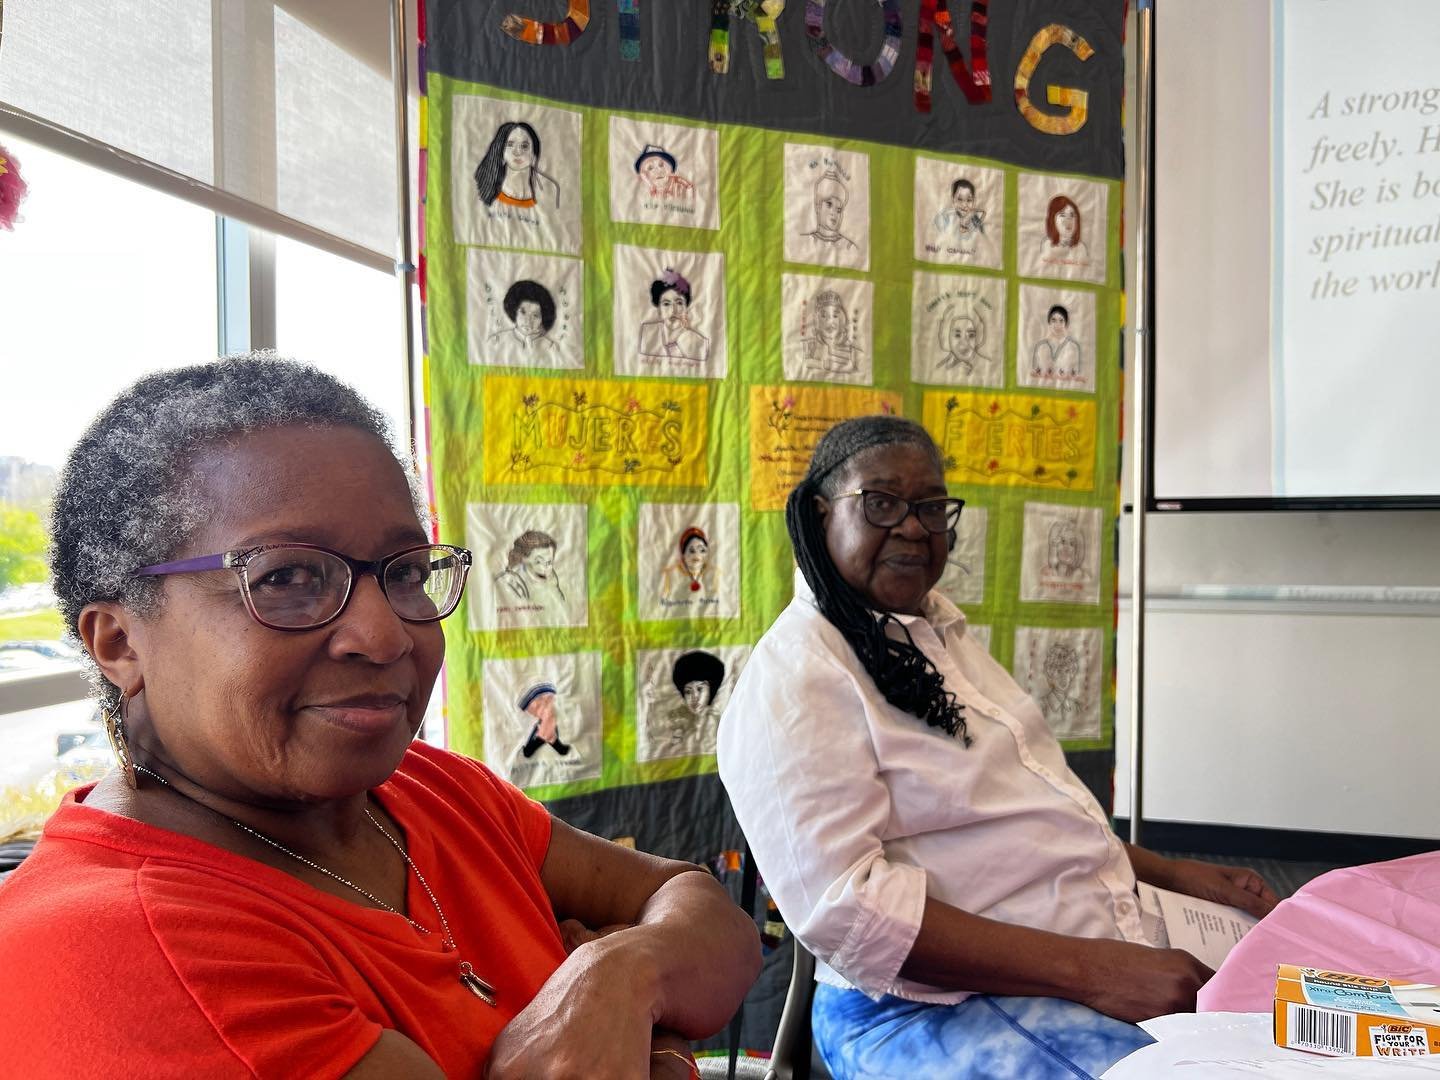 Leslie and Donna in front of the quilt, looking satisfied with our work 💖💖💖

#CraftingChange #CommunityArtTherapy #ArtTherapy #Quilts #Craft #CraftActivism #Craftivism

ID: a photo of two dark-skinned women, in front of a quilt. They&rsquo;re look